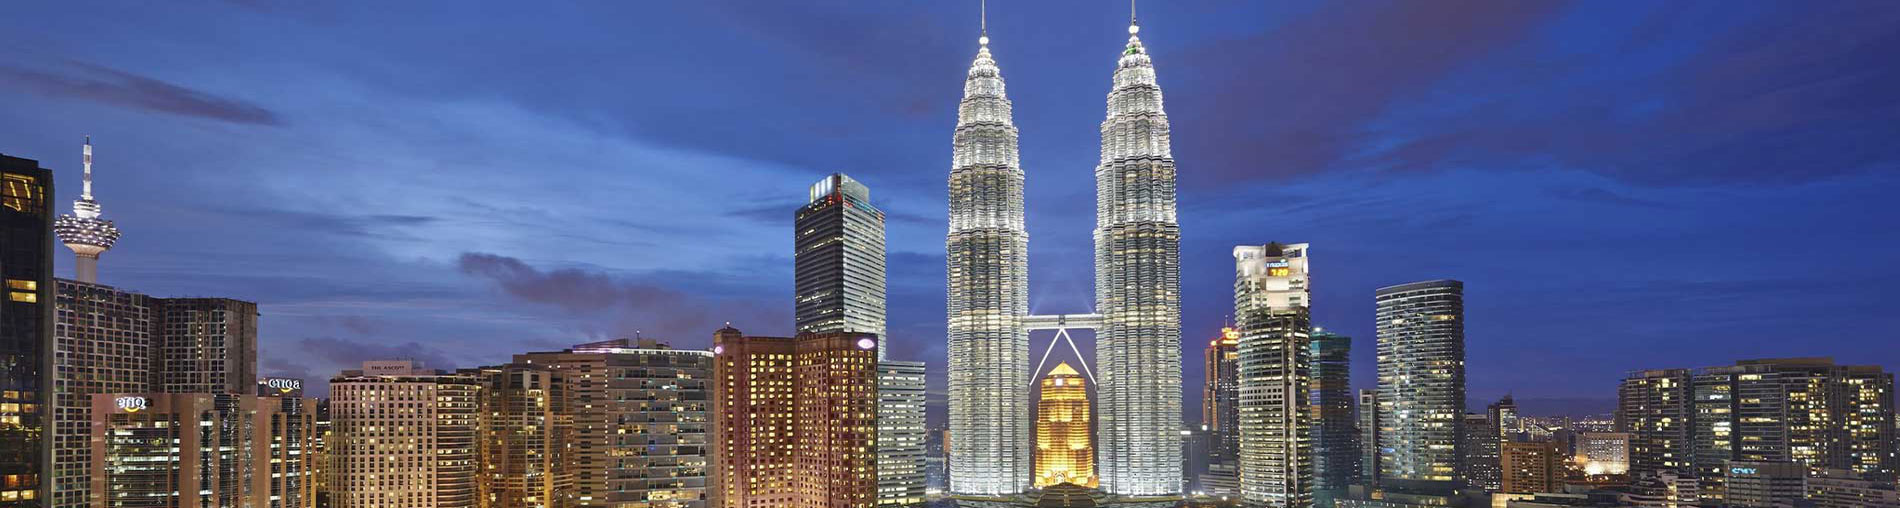 Malaysia Holiday Package - 5 Nights